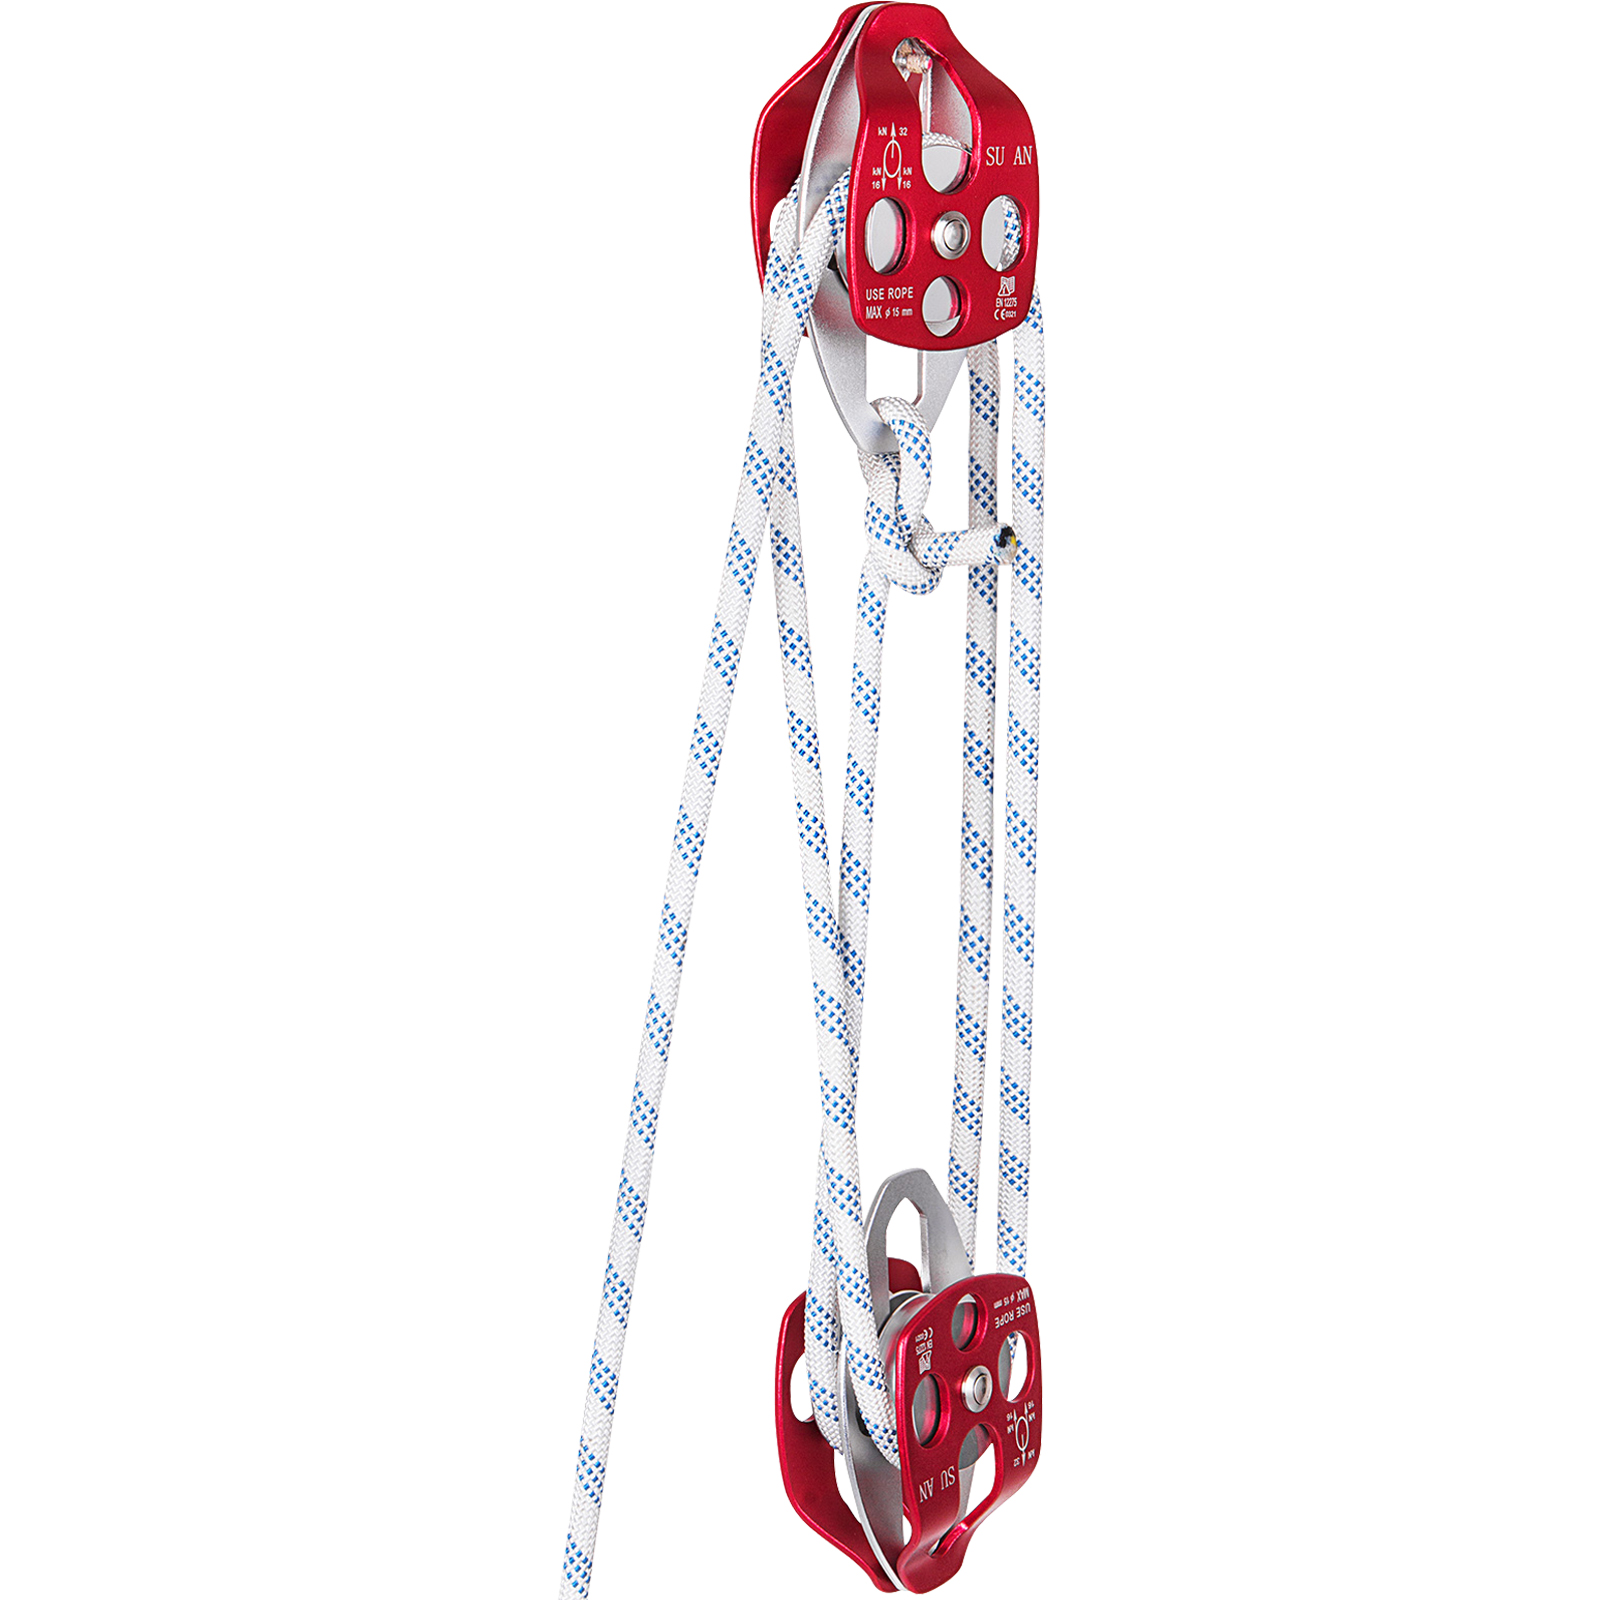 Twin Sheave Block And Tackle 6600lbs Pulley 200ft, 7/16inch Double Braid Rope от Vevor Many GEOs